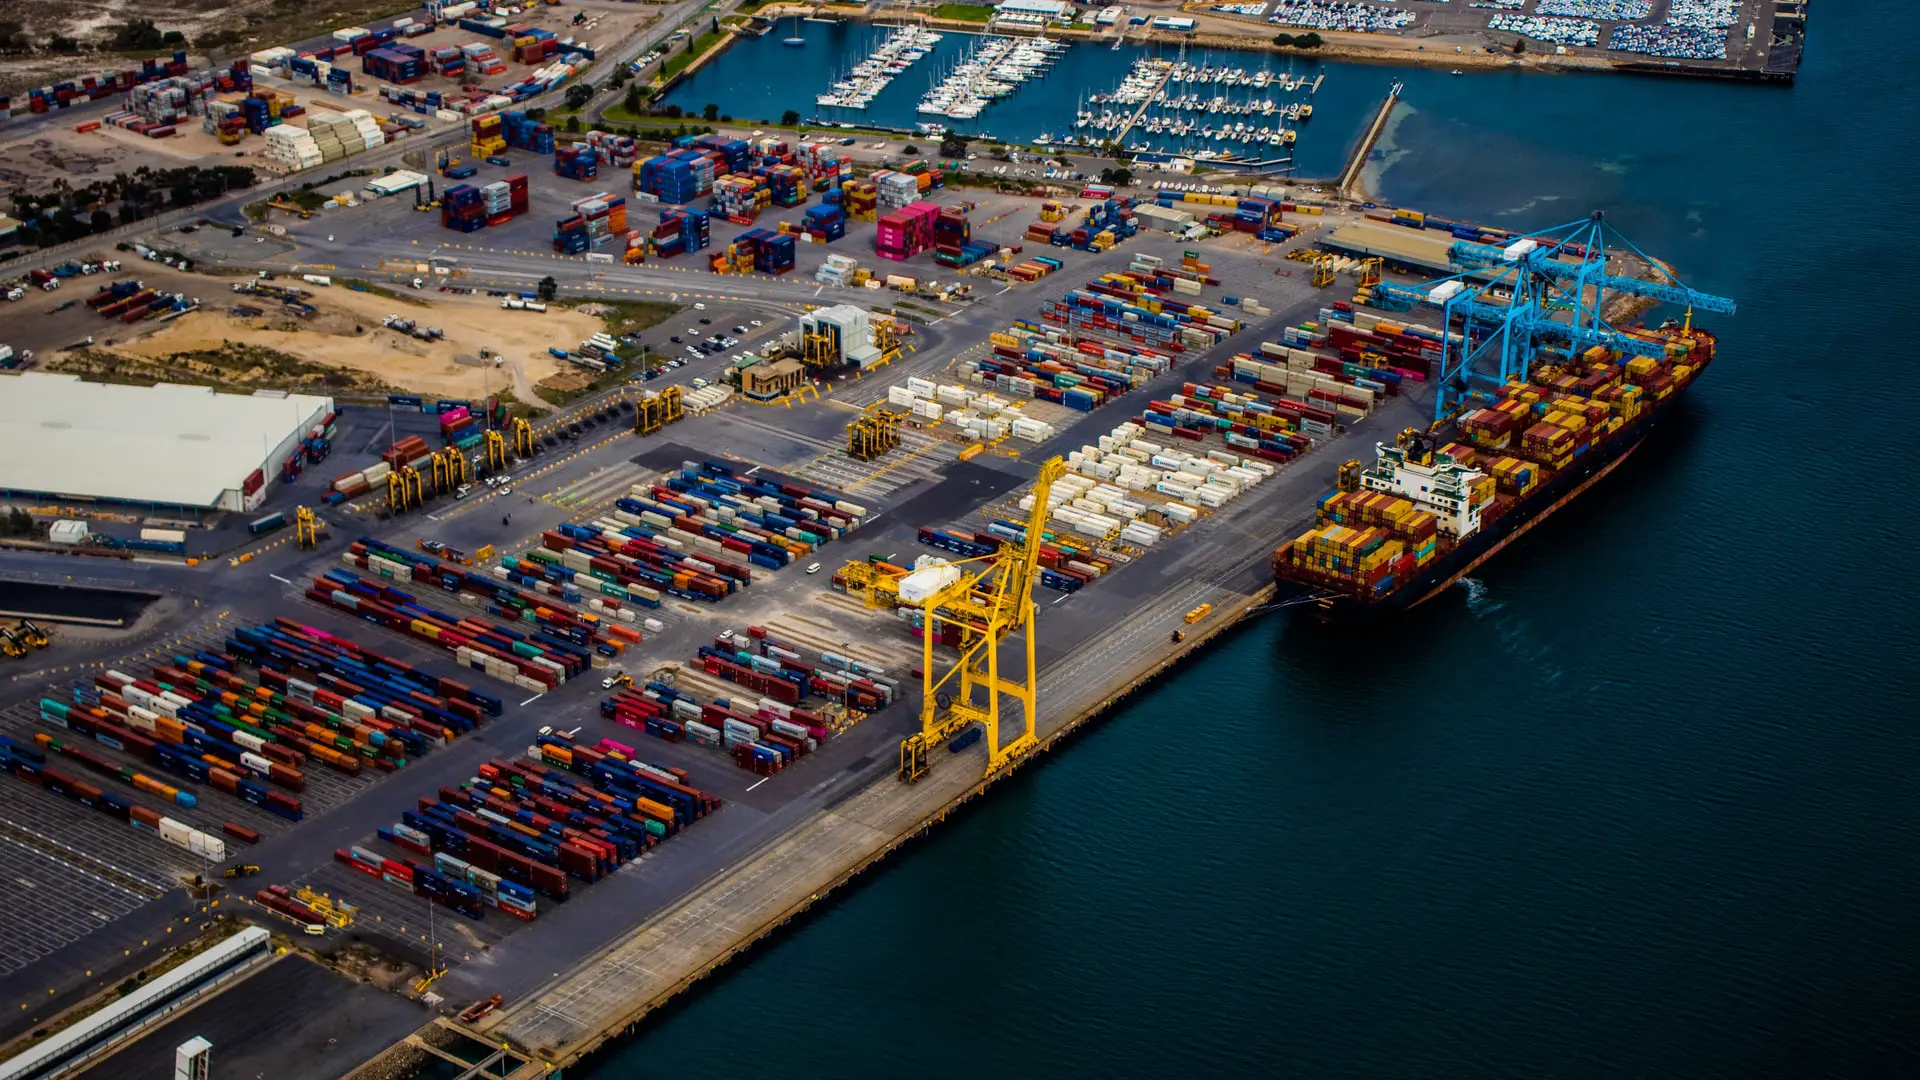 NNTC and Saibertech are Collaborating to Provide a Range of Tech Solutions for Ports